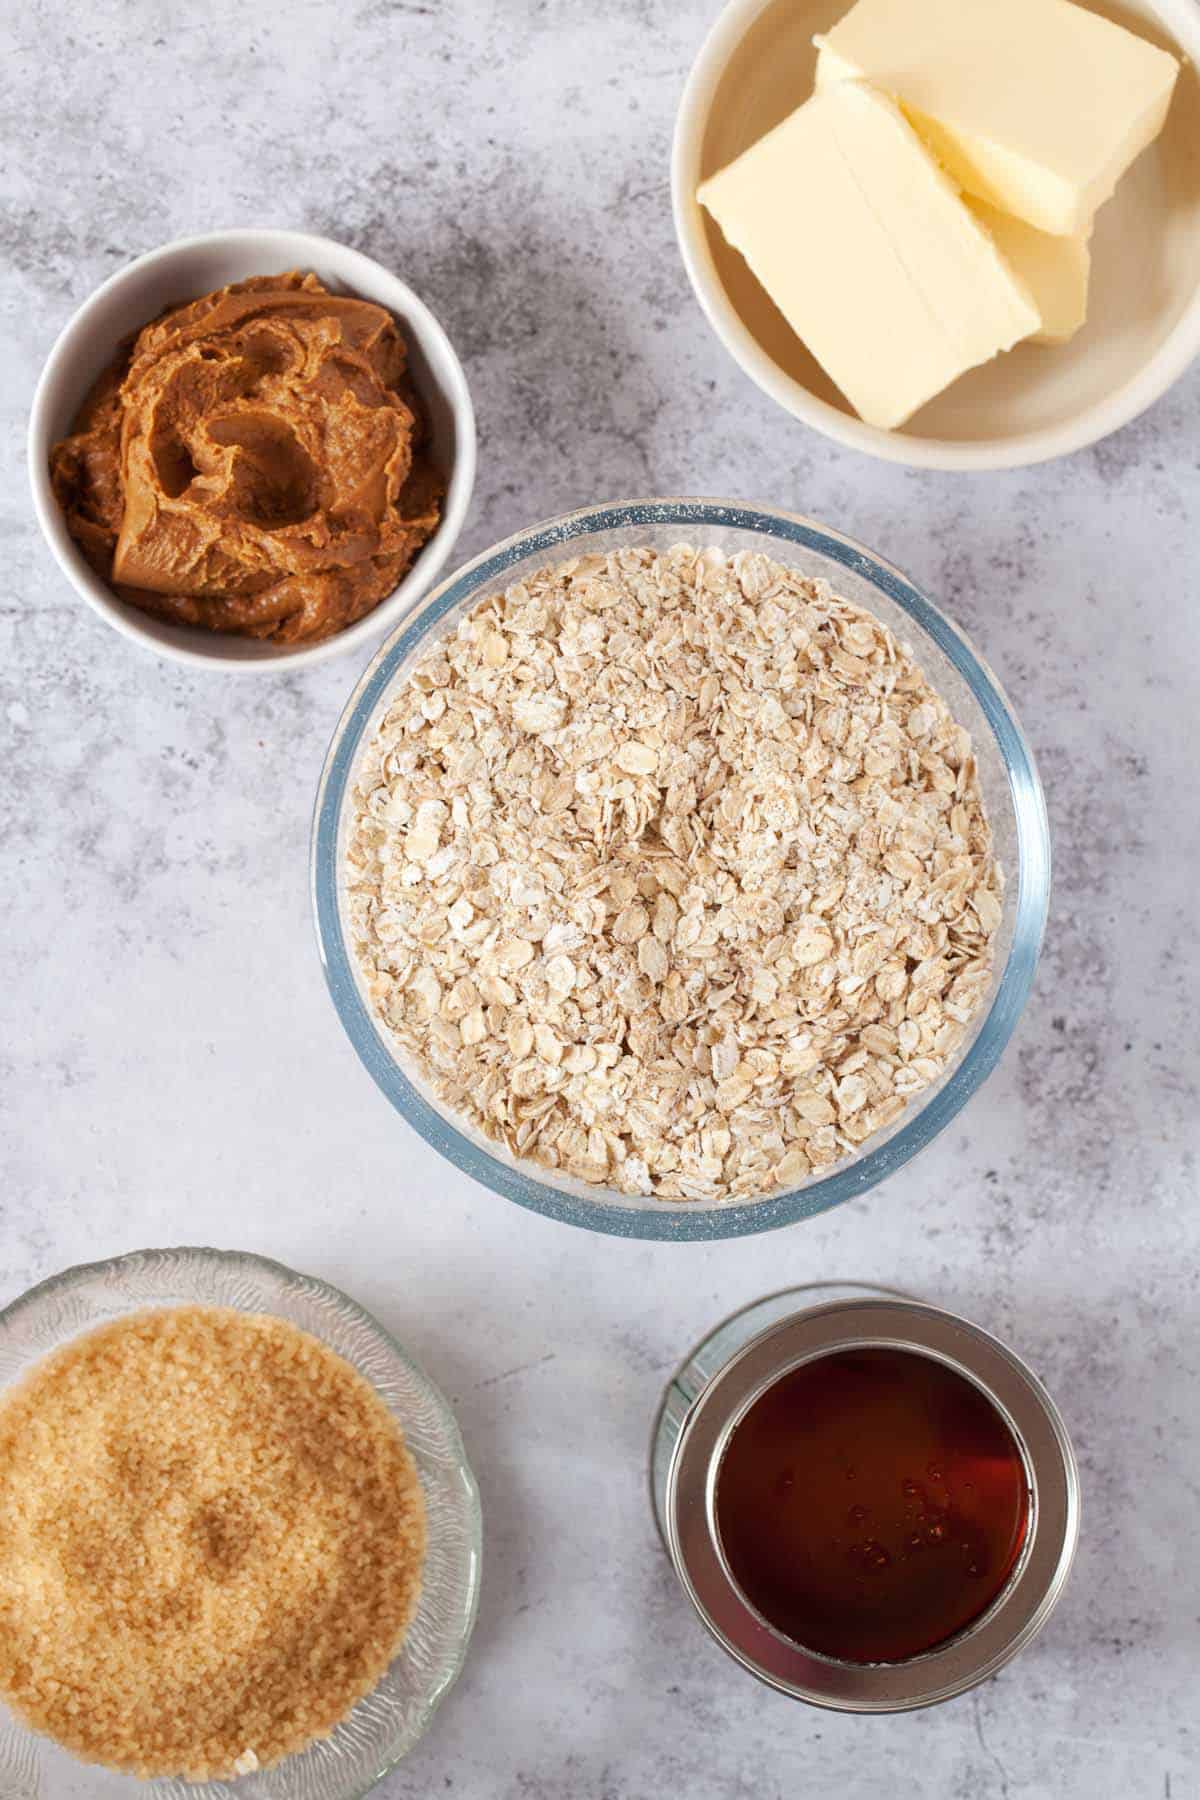 Ingredients in bowls - oats, butter, Biscoff spread, syrup and sugar